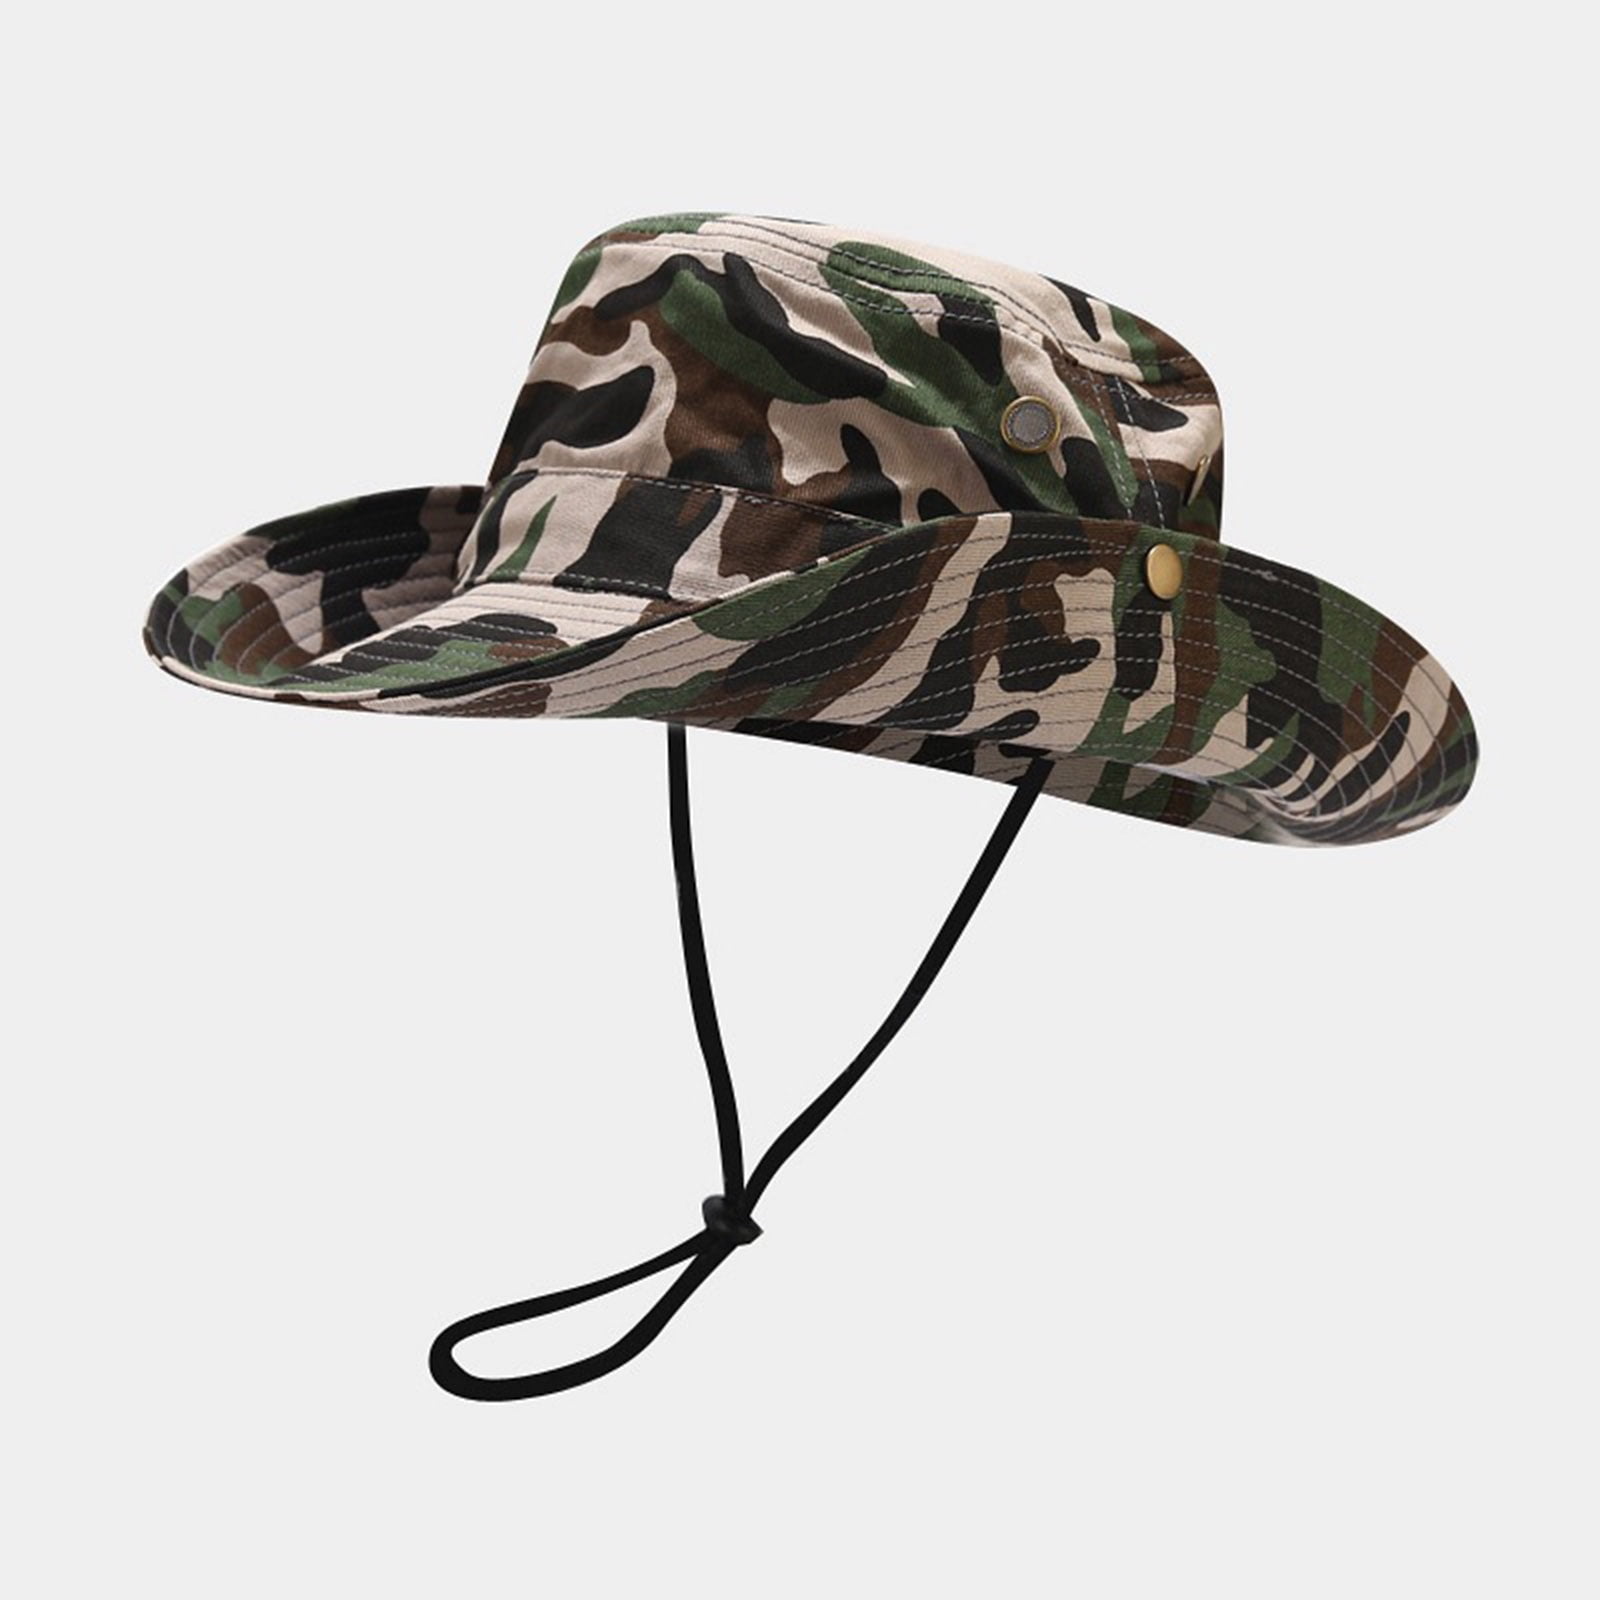 WEAIXIMIUNG Bucket Hat with Strings Women Outdoor Boonie Hat Wide Brim  Breathable Fishing Sun Hat for Men/Women Waterproof Wide Brim Bucket Hat  Boonie